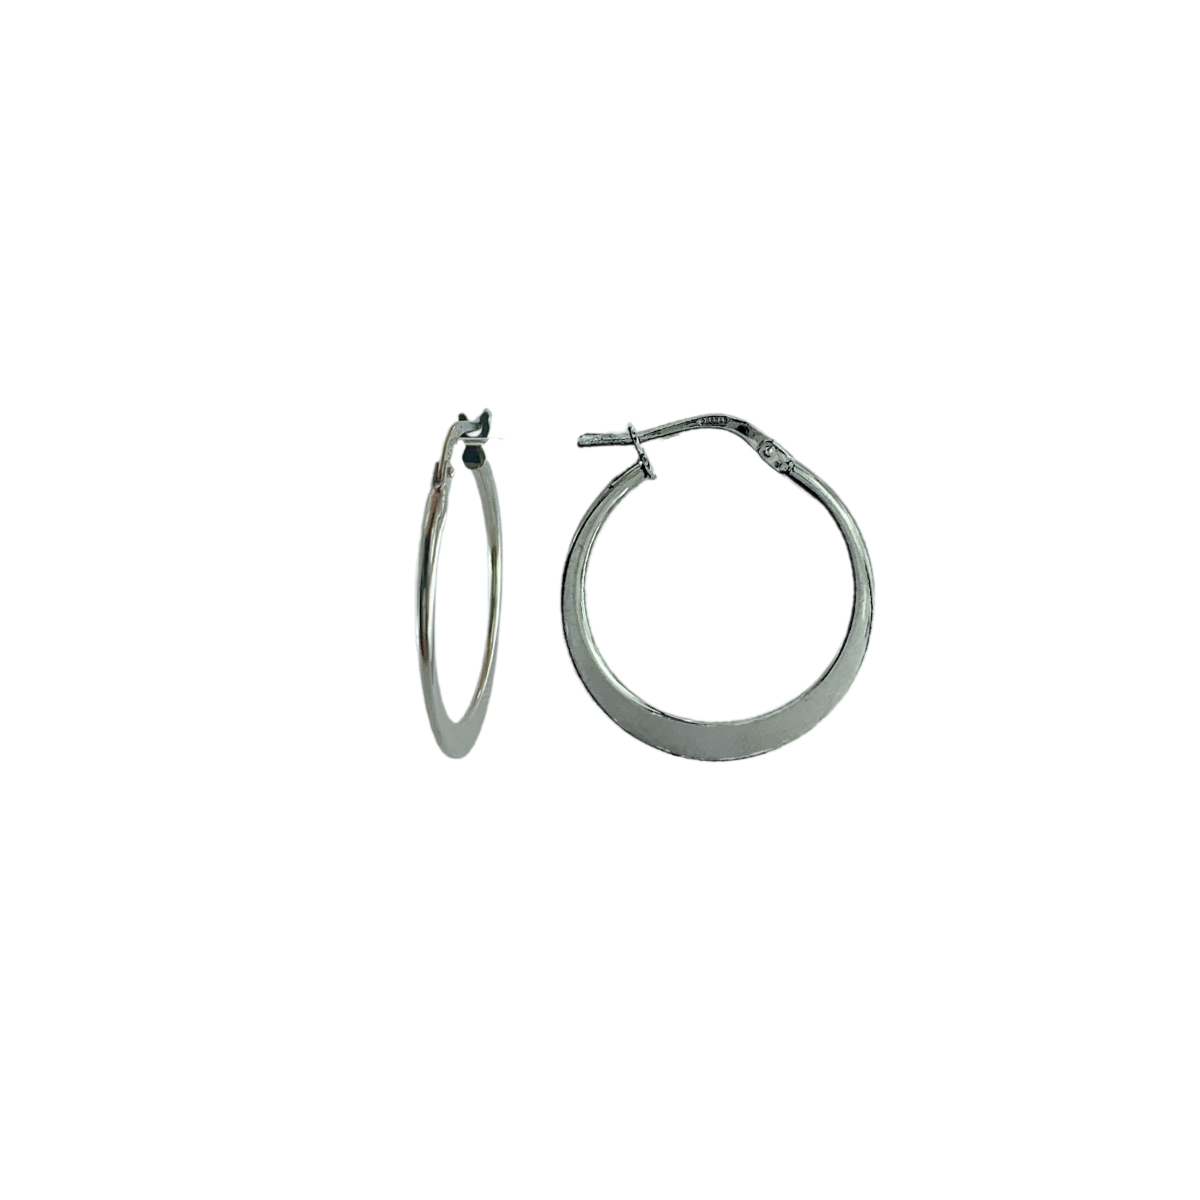 22MM SILVER FLAT EARRINGS. EITHER